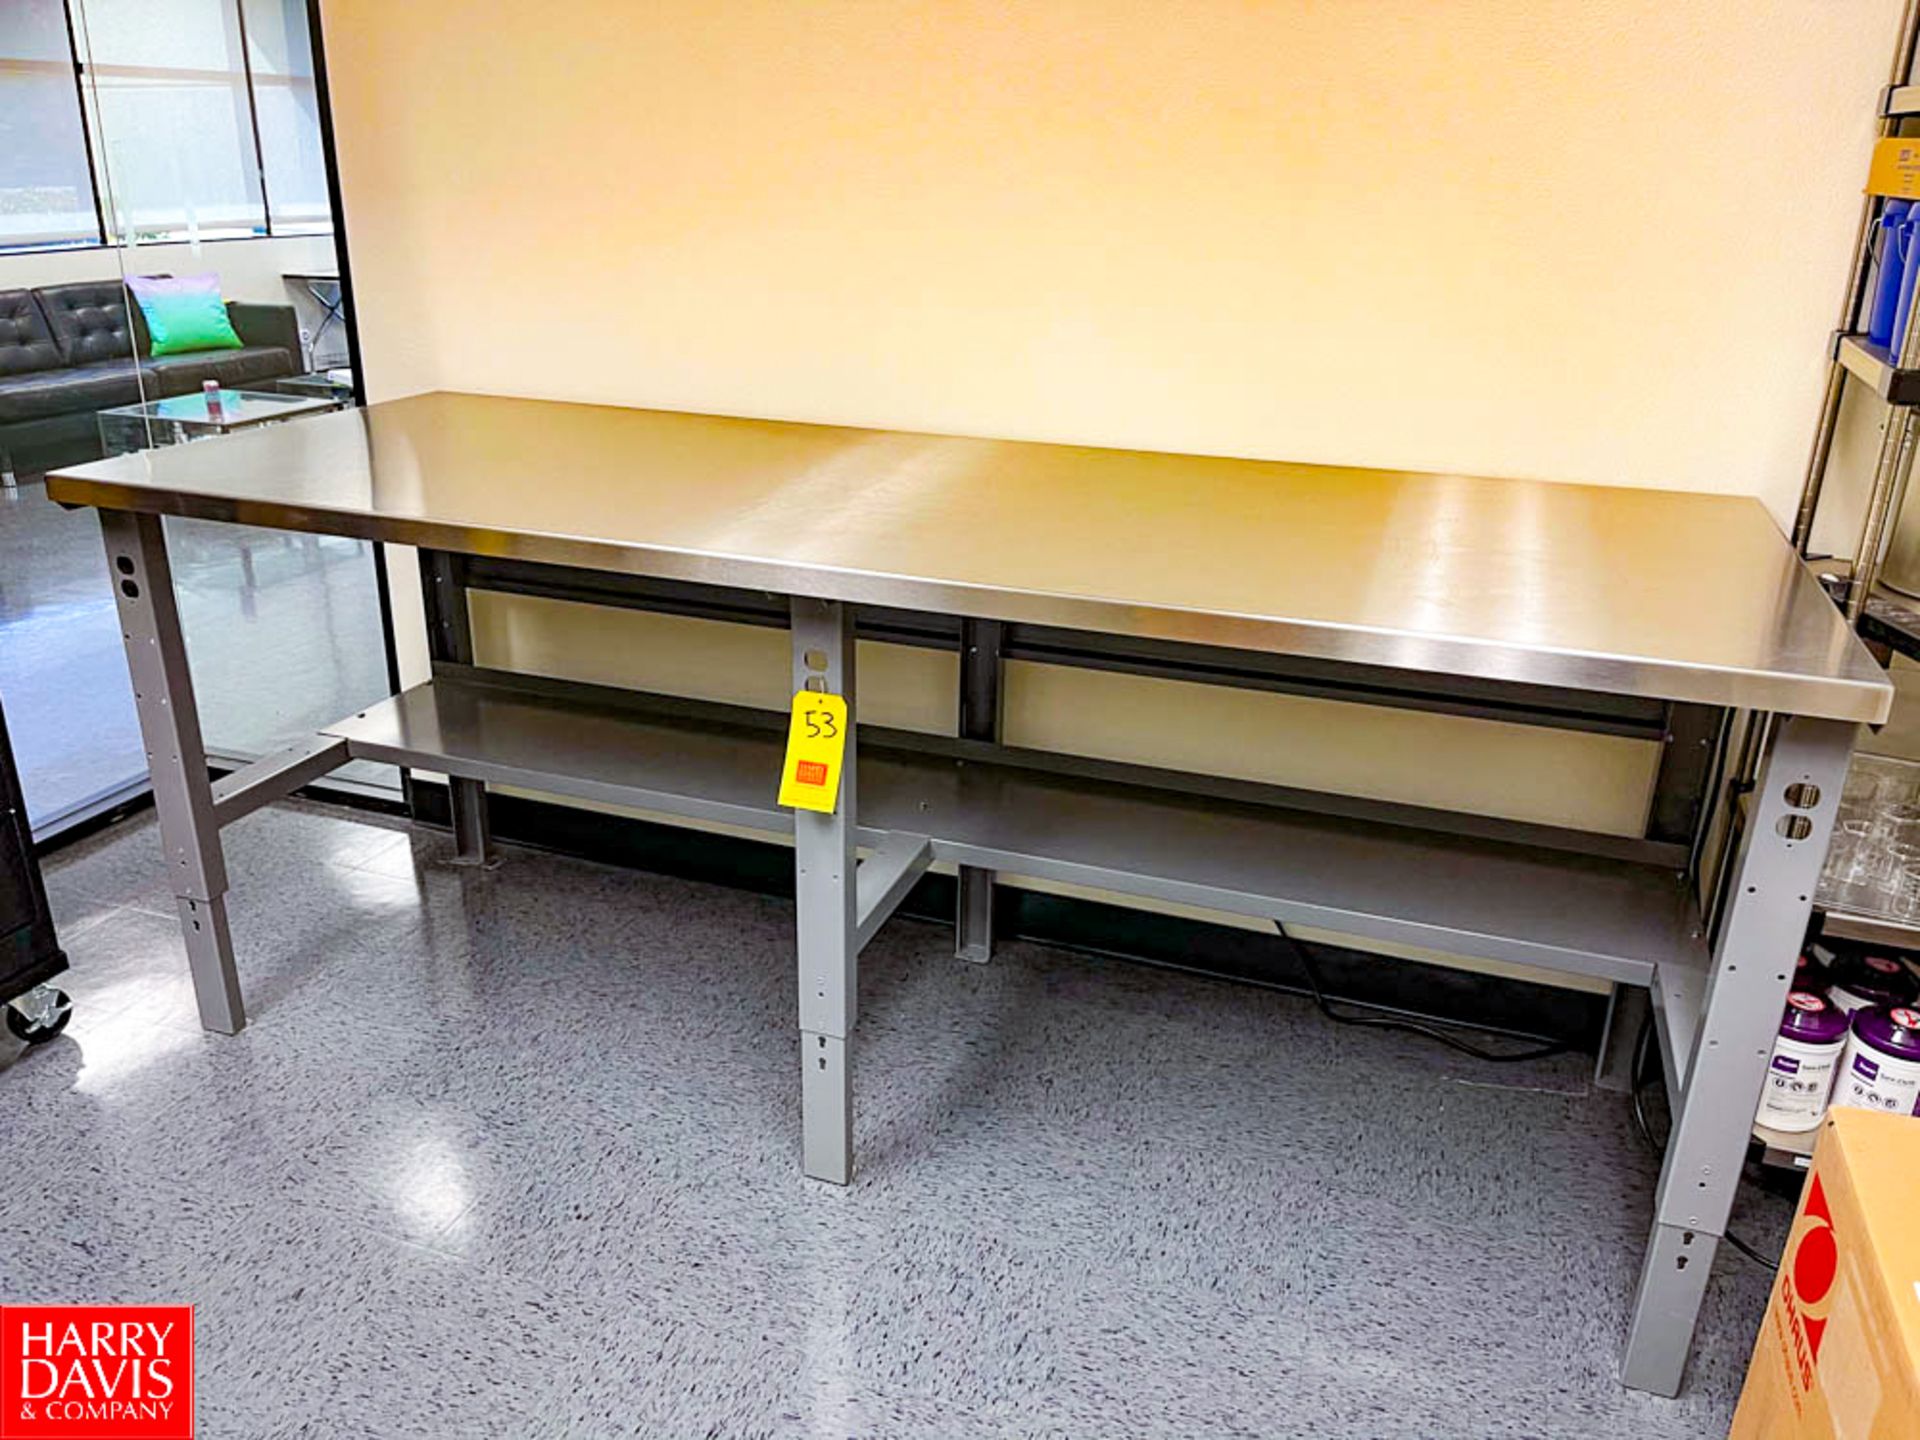 S/S Tables, 8' and 6' Length x 36" Depth x 40" Height (Adjustable, 30" - 40"). Rigging Fee: $75